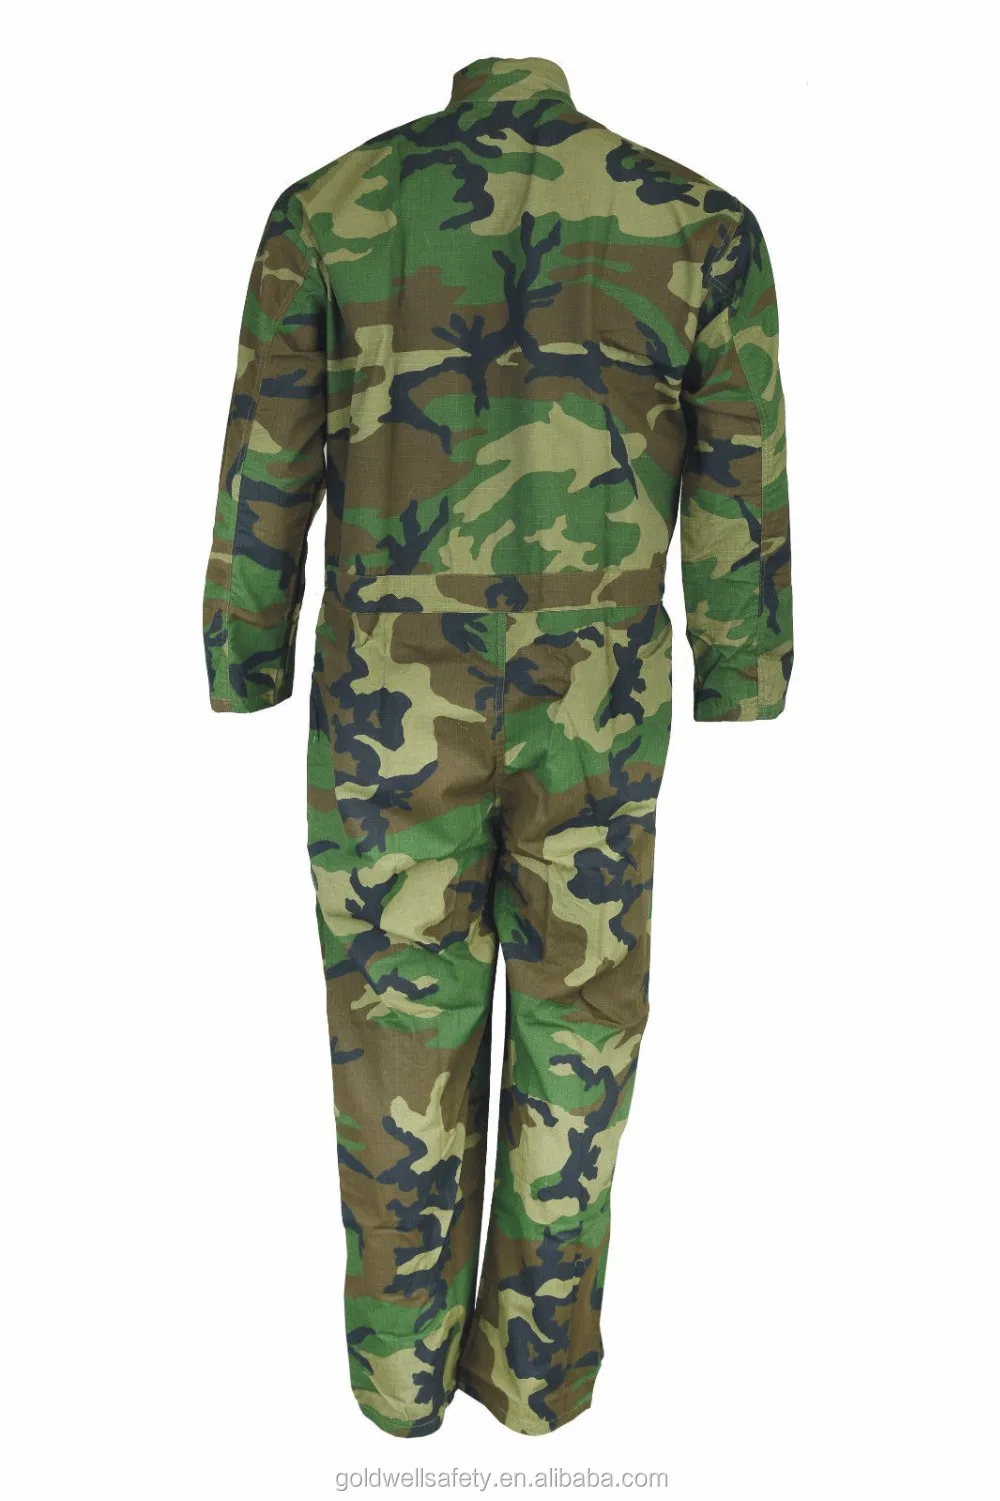 Tank Camouflage Protective Coverall Coverall - Buy Protective Coverall ...